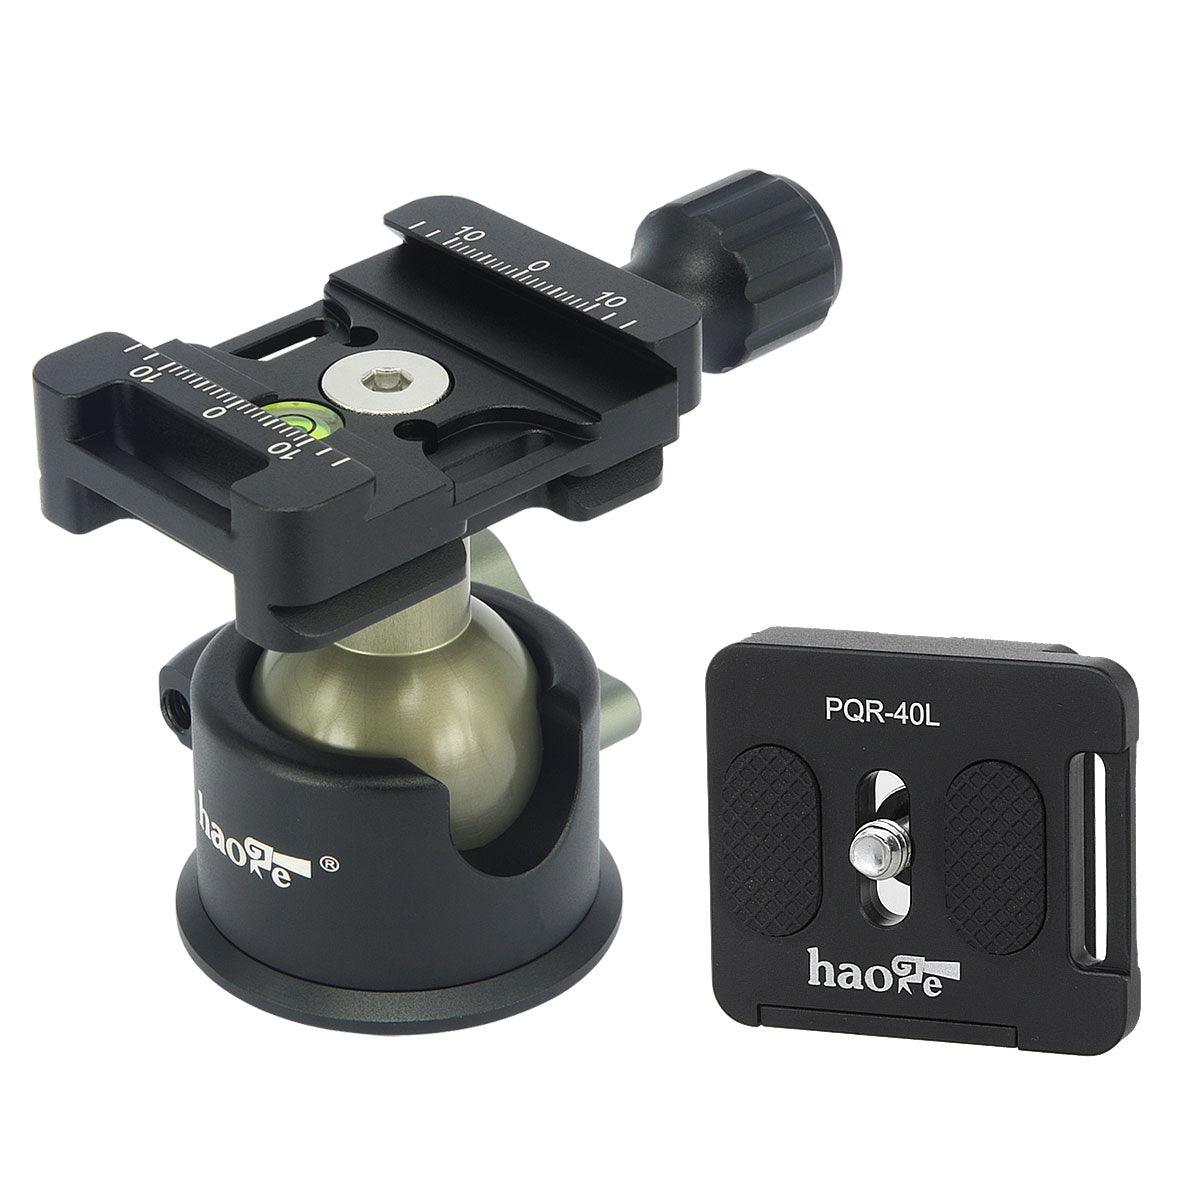 Haoge BH-45 Low Profile Ballhead Tripod Ball Head with Arca-Compatible Screw-Knob Quick Release Clamp and Plate for Tripod Monopod Slider DSLR Camera Camcorder Max Loading 8kg 17.6lb